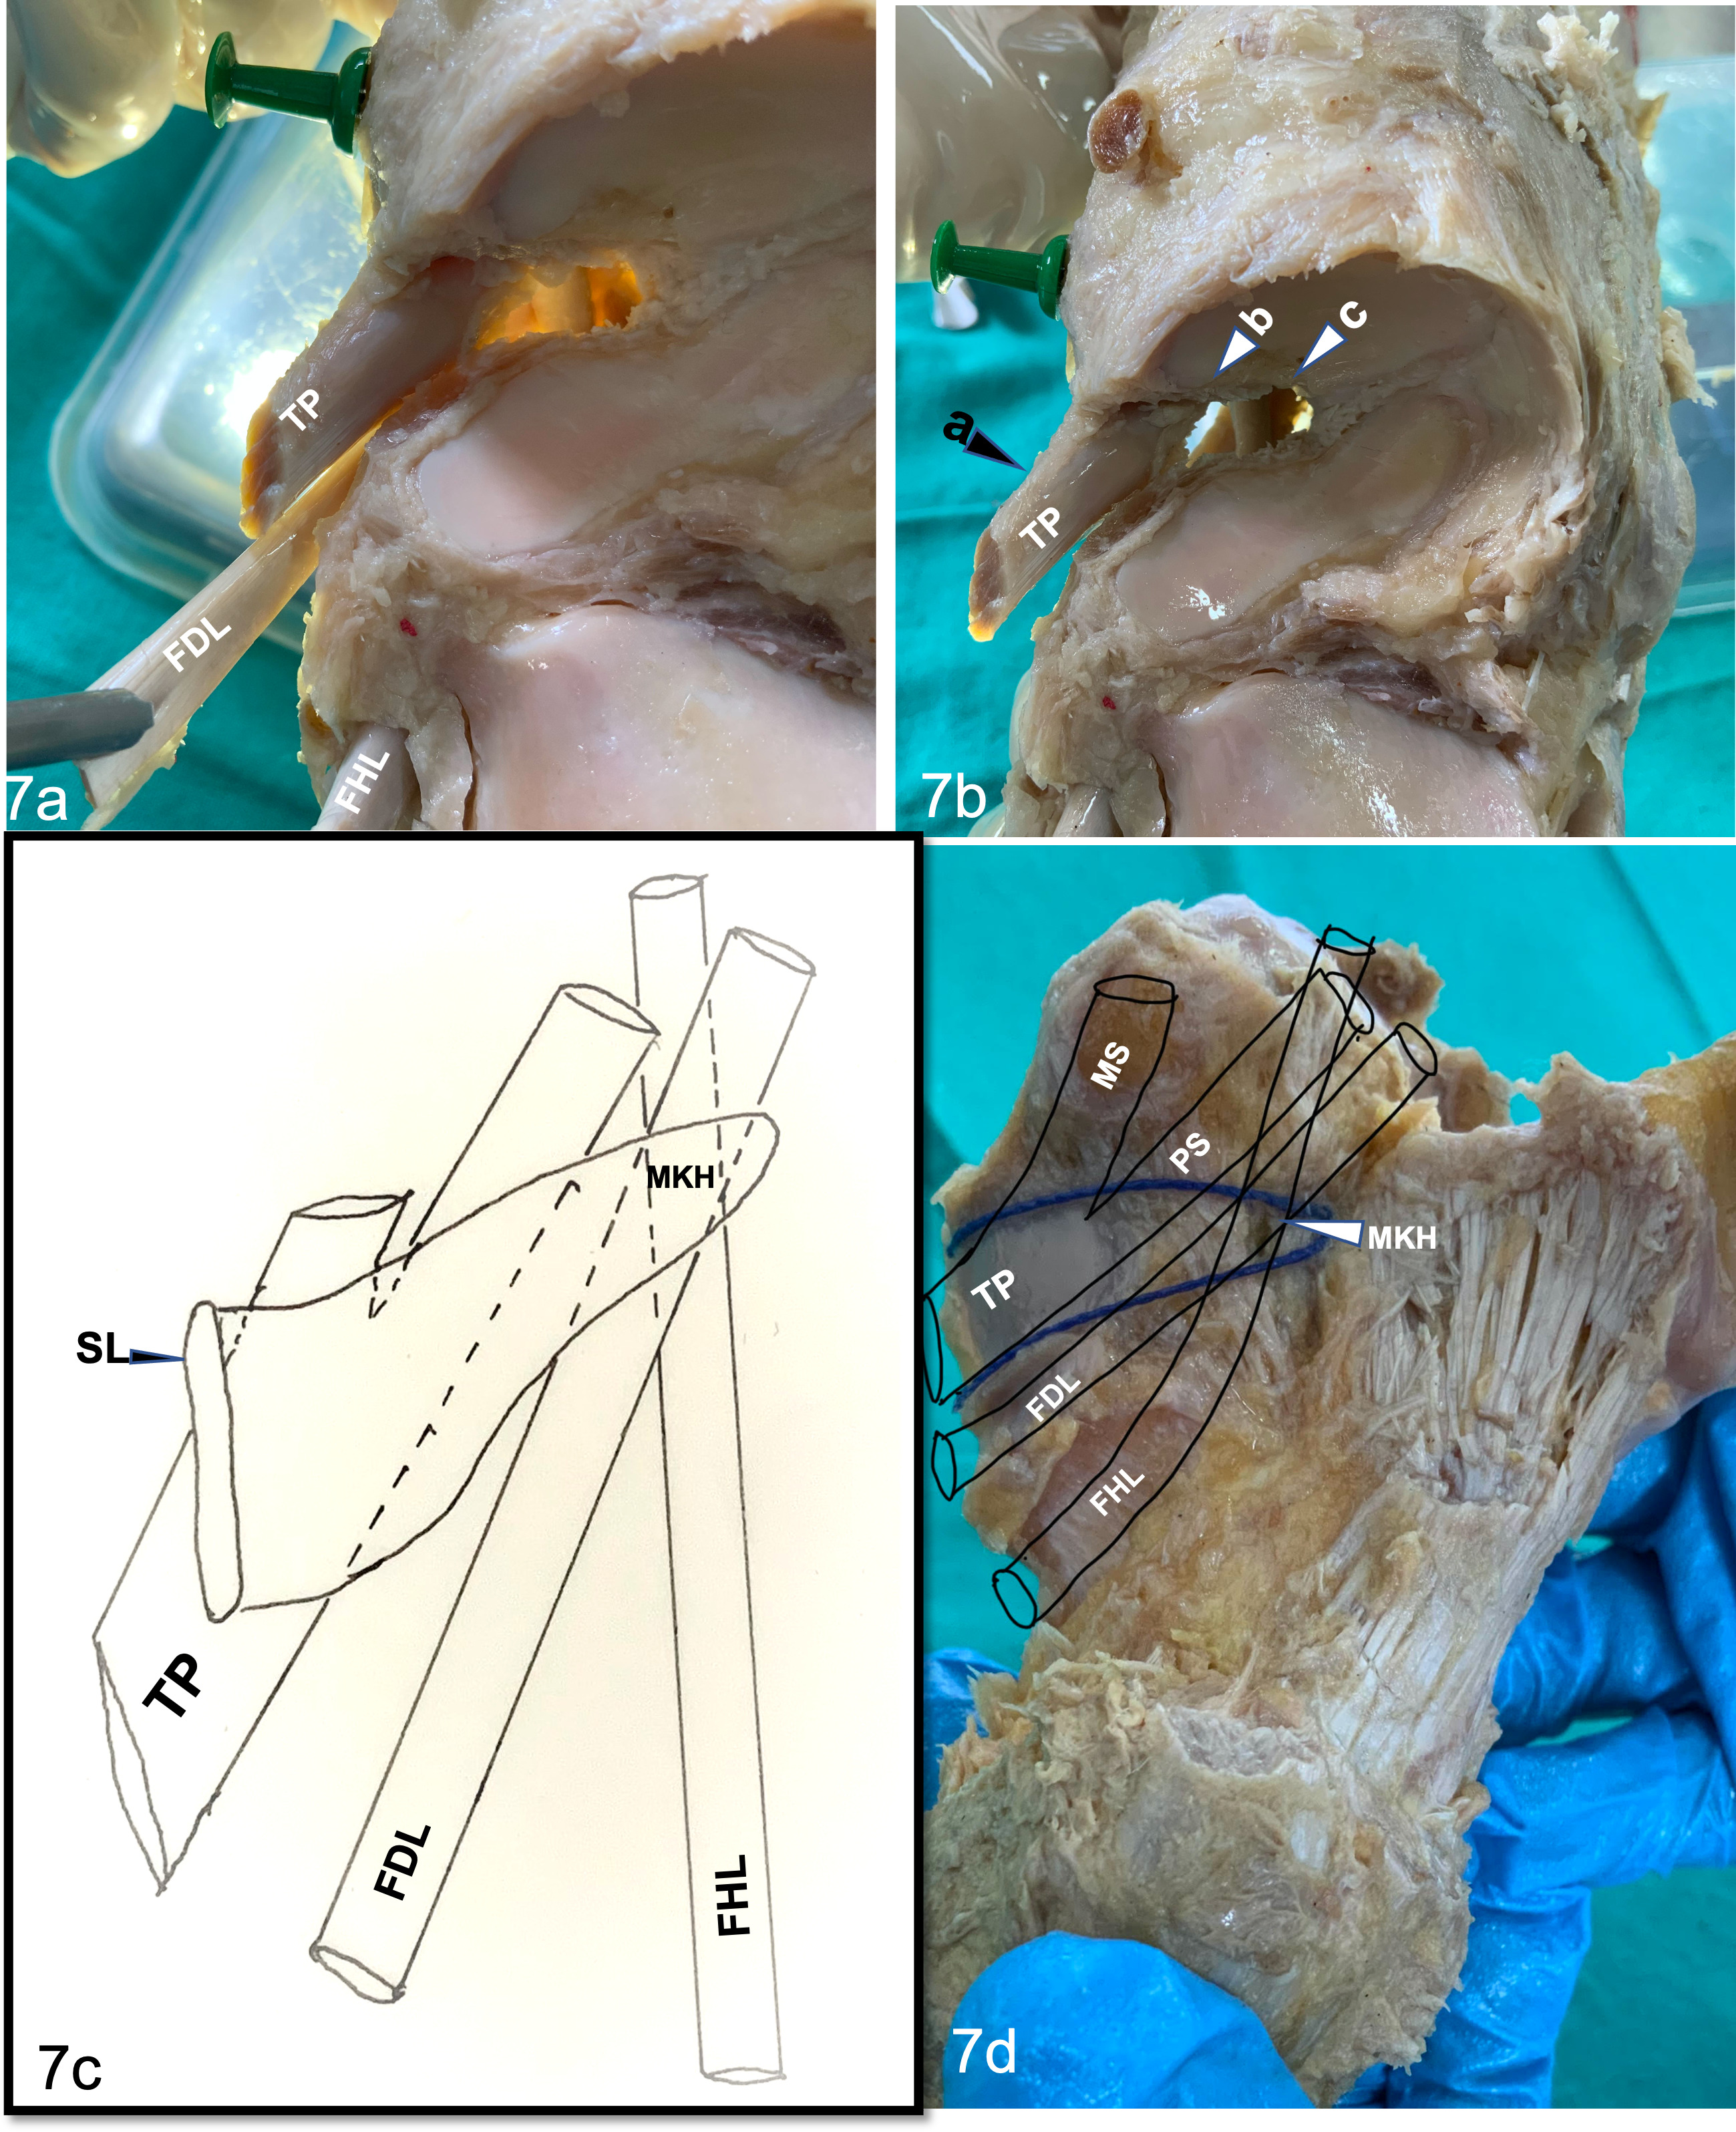 Fig. 7 
            Schematic of the dynamic support system of the talocalcaneonavicular (TCN) joint. Tendinous reinforcement of TCN joint as seen from above after removing talus and the spring ligament. Note the main tendon of tibialis posterior (TP) buttressing the highest and widest part of the osseous gap. a) TCN joint medially, b) the planter slips of tibialis posterior reinforcing inferomedially, and c) and the master knot of Henry (MKH) reinforcing the joint inferiorly. The schematic representation of the spring ligament with superimposition of dynamic supports reinforcing its different parts: the thread shows the spring ligament, demonstrating various parts of the spring ligament complex seen from the inferior aspect with schematic superimposition of dynamic supports, reinforcing its different parts. FDL, flexor digitorum longus; FHL, flexor hallucis longus; MS, main slip of the tendon of tibialis posterior, PS, planter slip of the tendon of tibialis posterior.
          